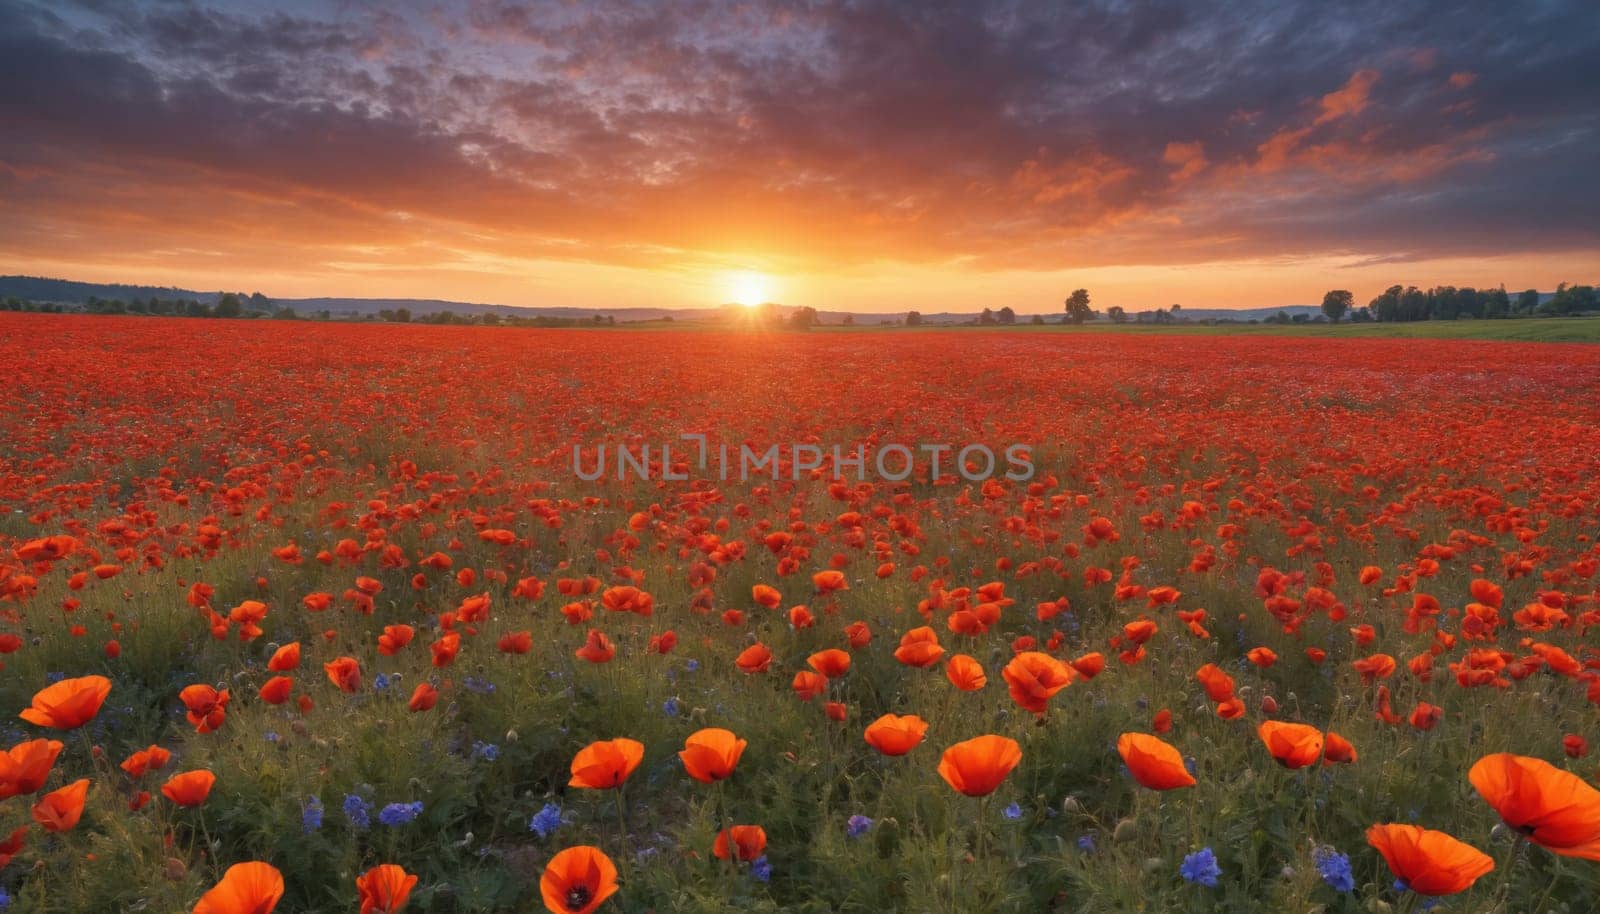 A field of vibrant red poppies stretches out towards a distant horizon, bathed in the golden light of a summer sunset. The sky is awash with warm hues of orange and pink as the sun dips below the horizon, casting long shadows across the field. The poppies stand tall and proud, their delicate petals unfurling in the gentle breeze. The scene is one of quiet beauty and tranquility, a moment of peaceful serenity in the natural world.